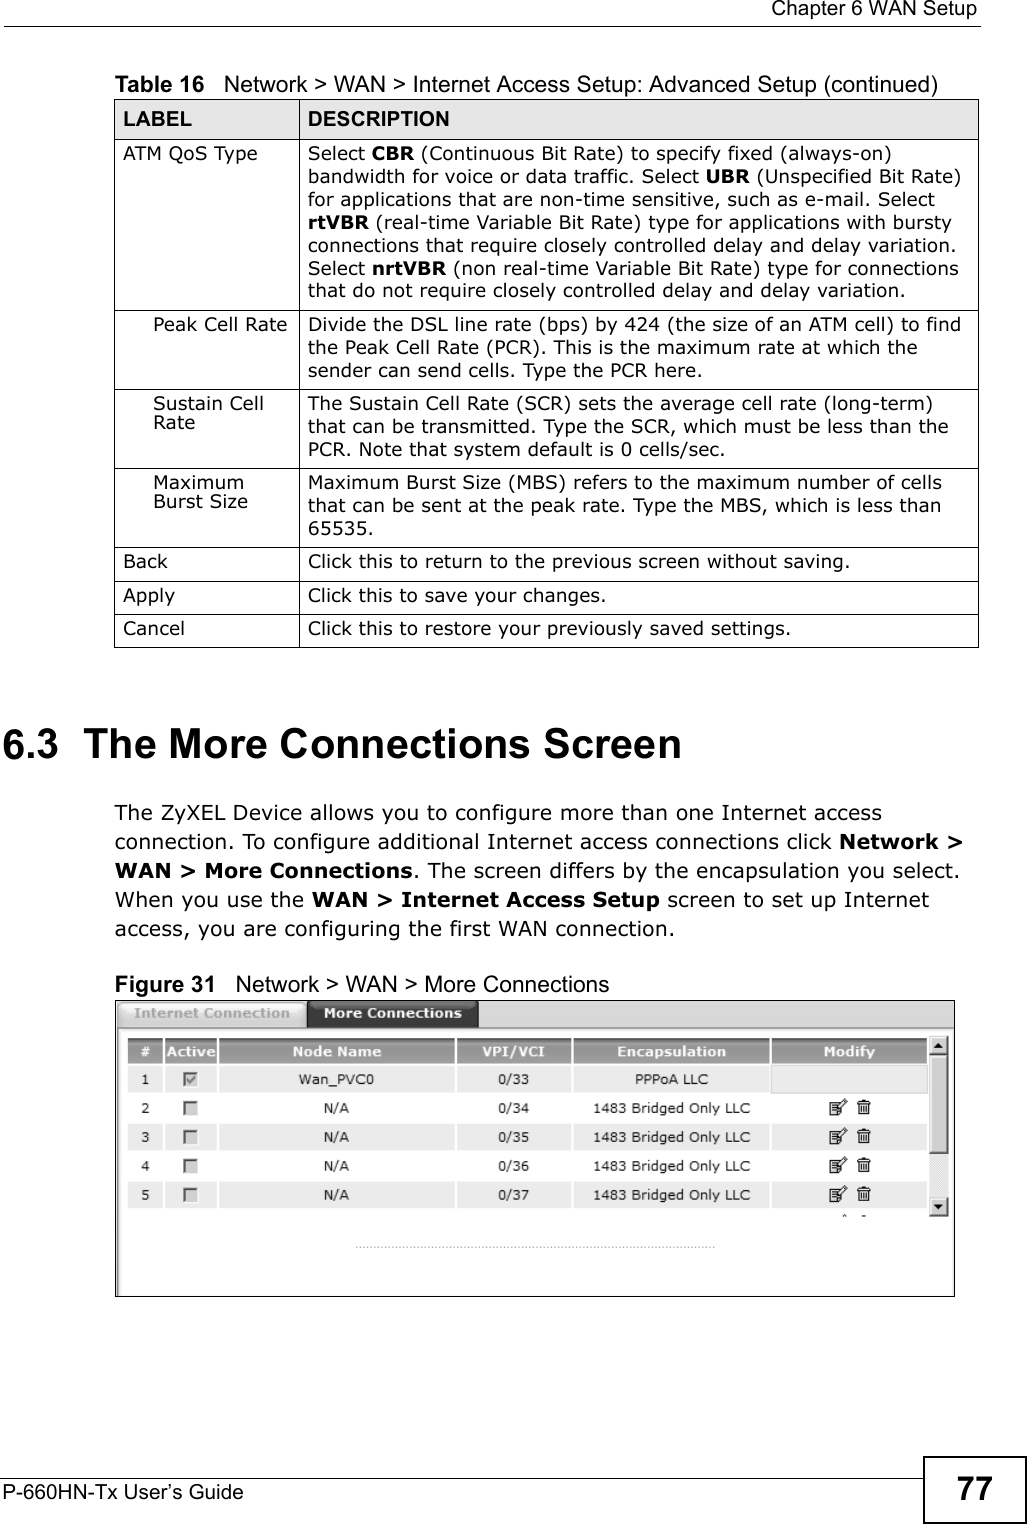  Chapter 6 WAN SetupP-660HN-Tx User’s Guide 776.3  The More Connections ScreenThe ZyXEL Device allows you to configure more than one Internet access connection. To configure additional Internet access connections click Network &gt; WAN &gt; More Connections. The screen differs by the encapsulation you select. When you use the WAN &gt; Internet Access Setup screen to set up Internet access, you are configuring the first WAN connection.Figure 31   Network &gt; WAN &gt; More ConnectionsATM QoS Type Select CBR (Continuous Bit Rate) to specify fixed (always-on) bandwidth for voice or data traffic. Select UBR (Unspecified Bit Rate) for applications that are non-time sensitive, such as e-mail. Select rtVBR (real-time Variable Bit Rate) type for applications with bursty connections that require closely controlled delay and delay variation. Select nrtVBR (non real-time Variable Bit Rate) type for connections that do not require closely controlled delay and delay variation.Peak Cell Rate Divide the DSL line rate (bps) by 424 (the size of an ATM cell) to find the Peak Cell Rate (PCR). This is the maximum rate at which the sender can send cells. Type the PCR here.Sustain Cell Rate The Sustain Cell Rate (SCR) sets the average cell rate (long-term) that can be transmitted. Type the SCR, which must be less than the PCR. Note that system default is 0 cells/sec. Maximum Burst Size Maximum Burst Size (MBS) refers to the maximum number of cells that can be sent at the peak rate. Type the MBS, which is less than 65535. Back Click this to return to the previous screen without saving.Apply Click this to save your changes. Cancel Click this to restore your previously saved settings.Table 16   Network &gt; WAN &gt; Internet Access Setup: Advanced Setup (continued)LABEL DESCRIPTION